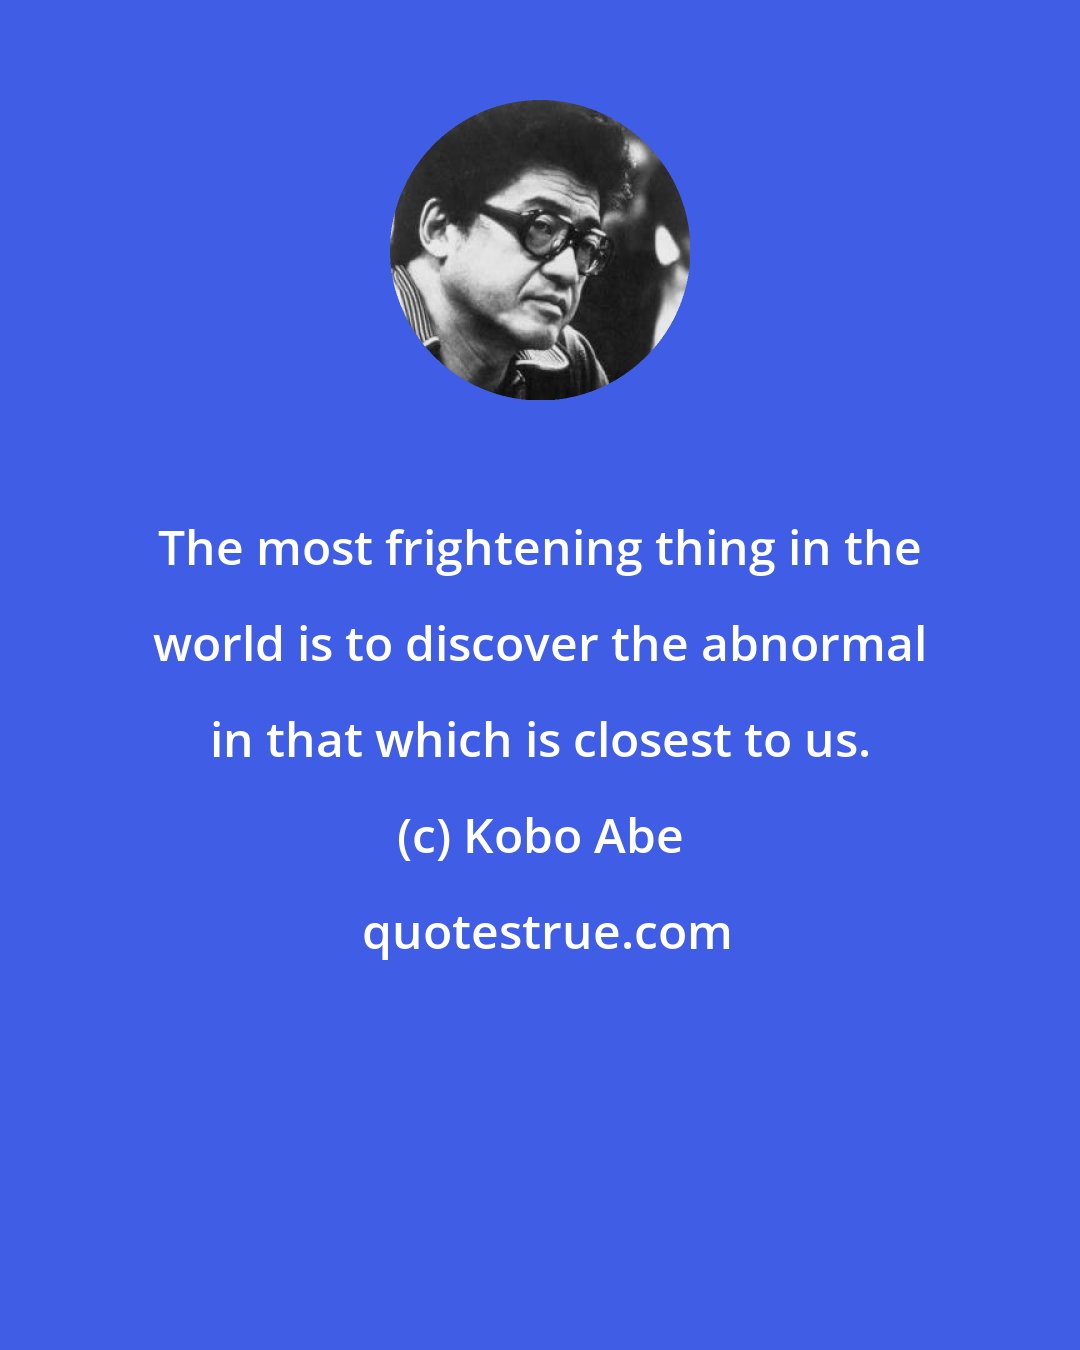 Kobo Abe: The most frightening thing in the world is to discover the abnormal in that which is closest to us.